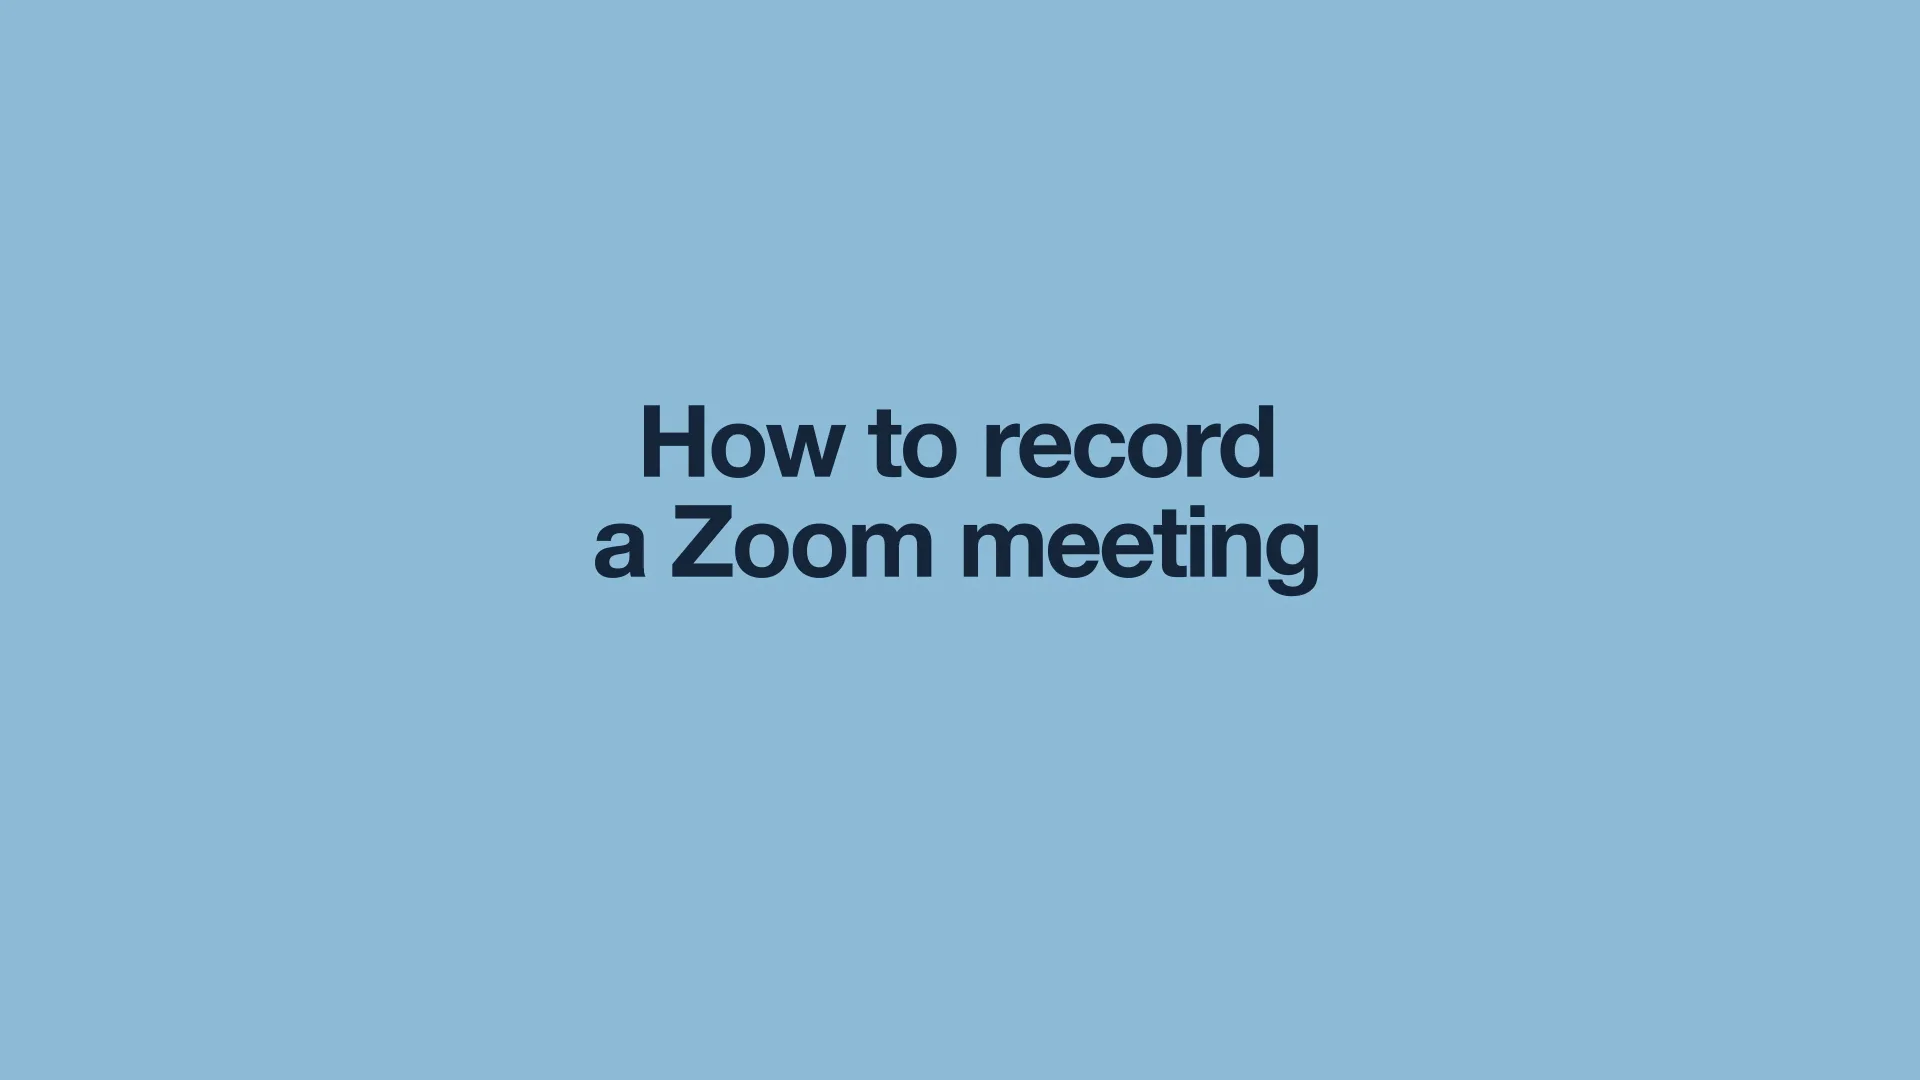 How to Record Zoom Meetings With or Without Permission